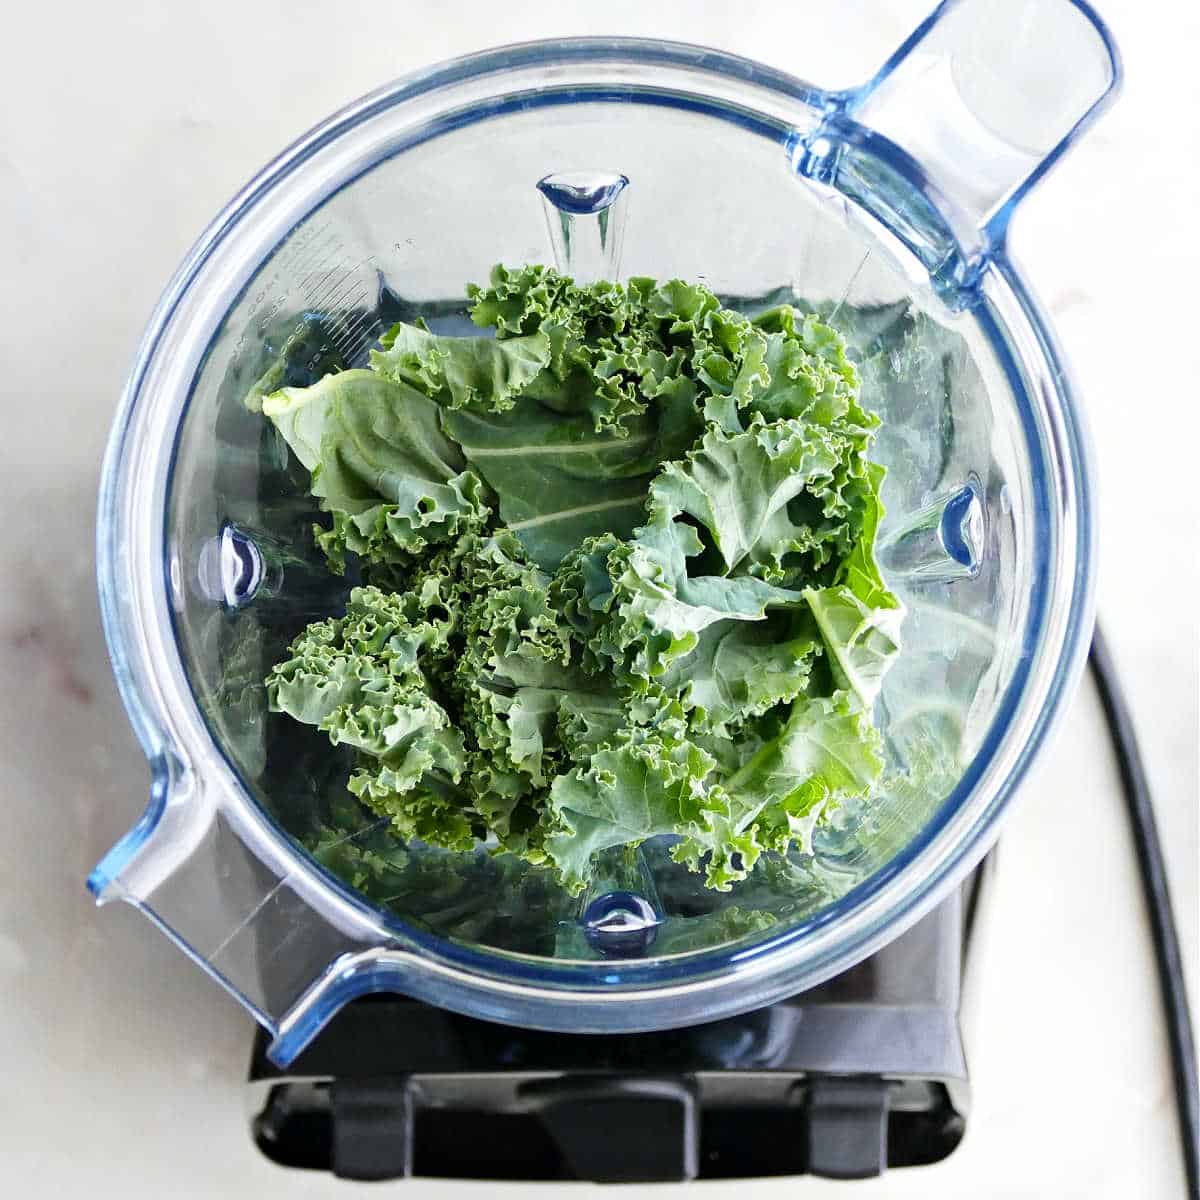 torn kale leaves in a blender on a counter